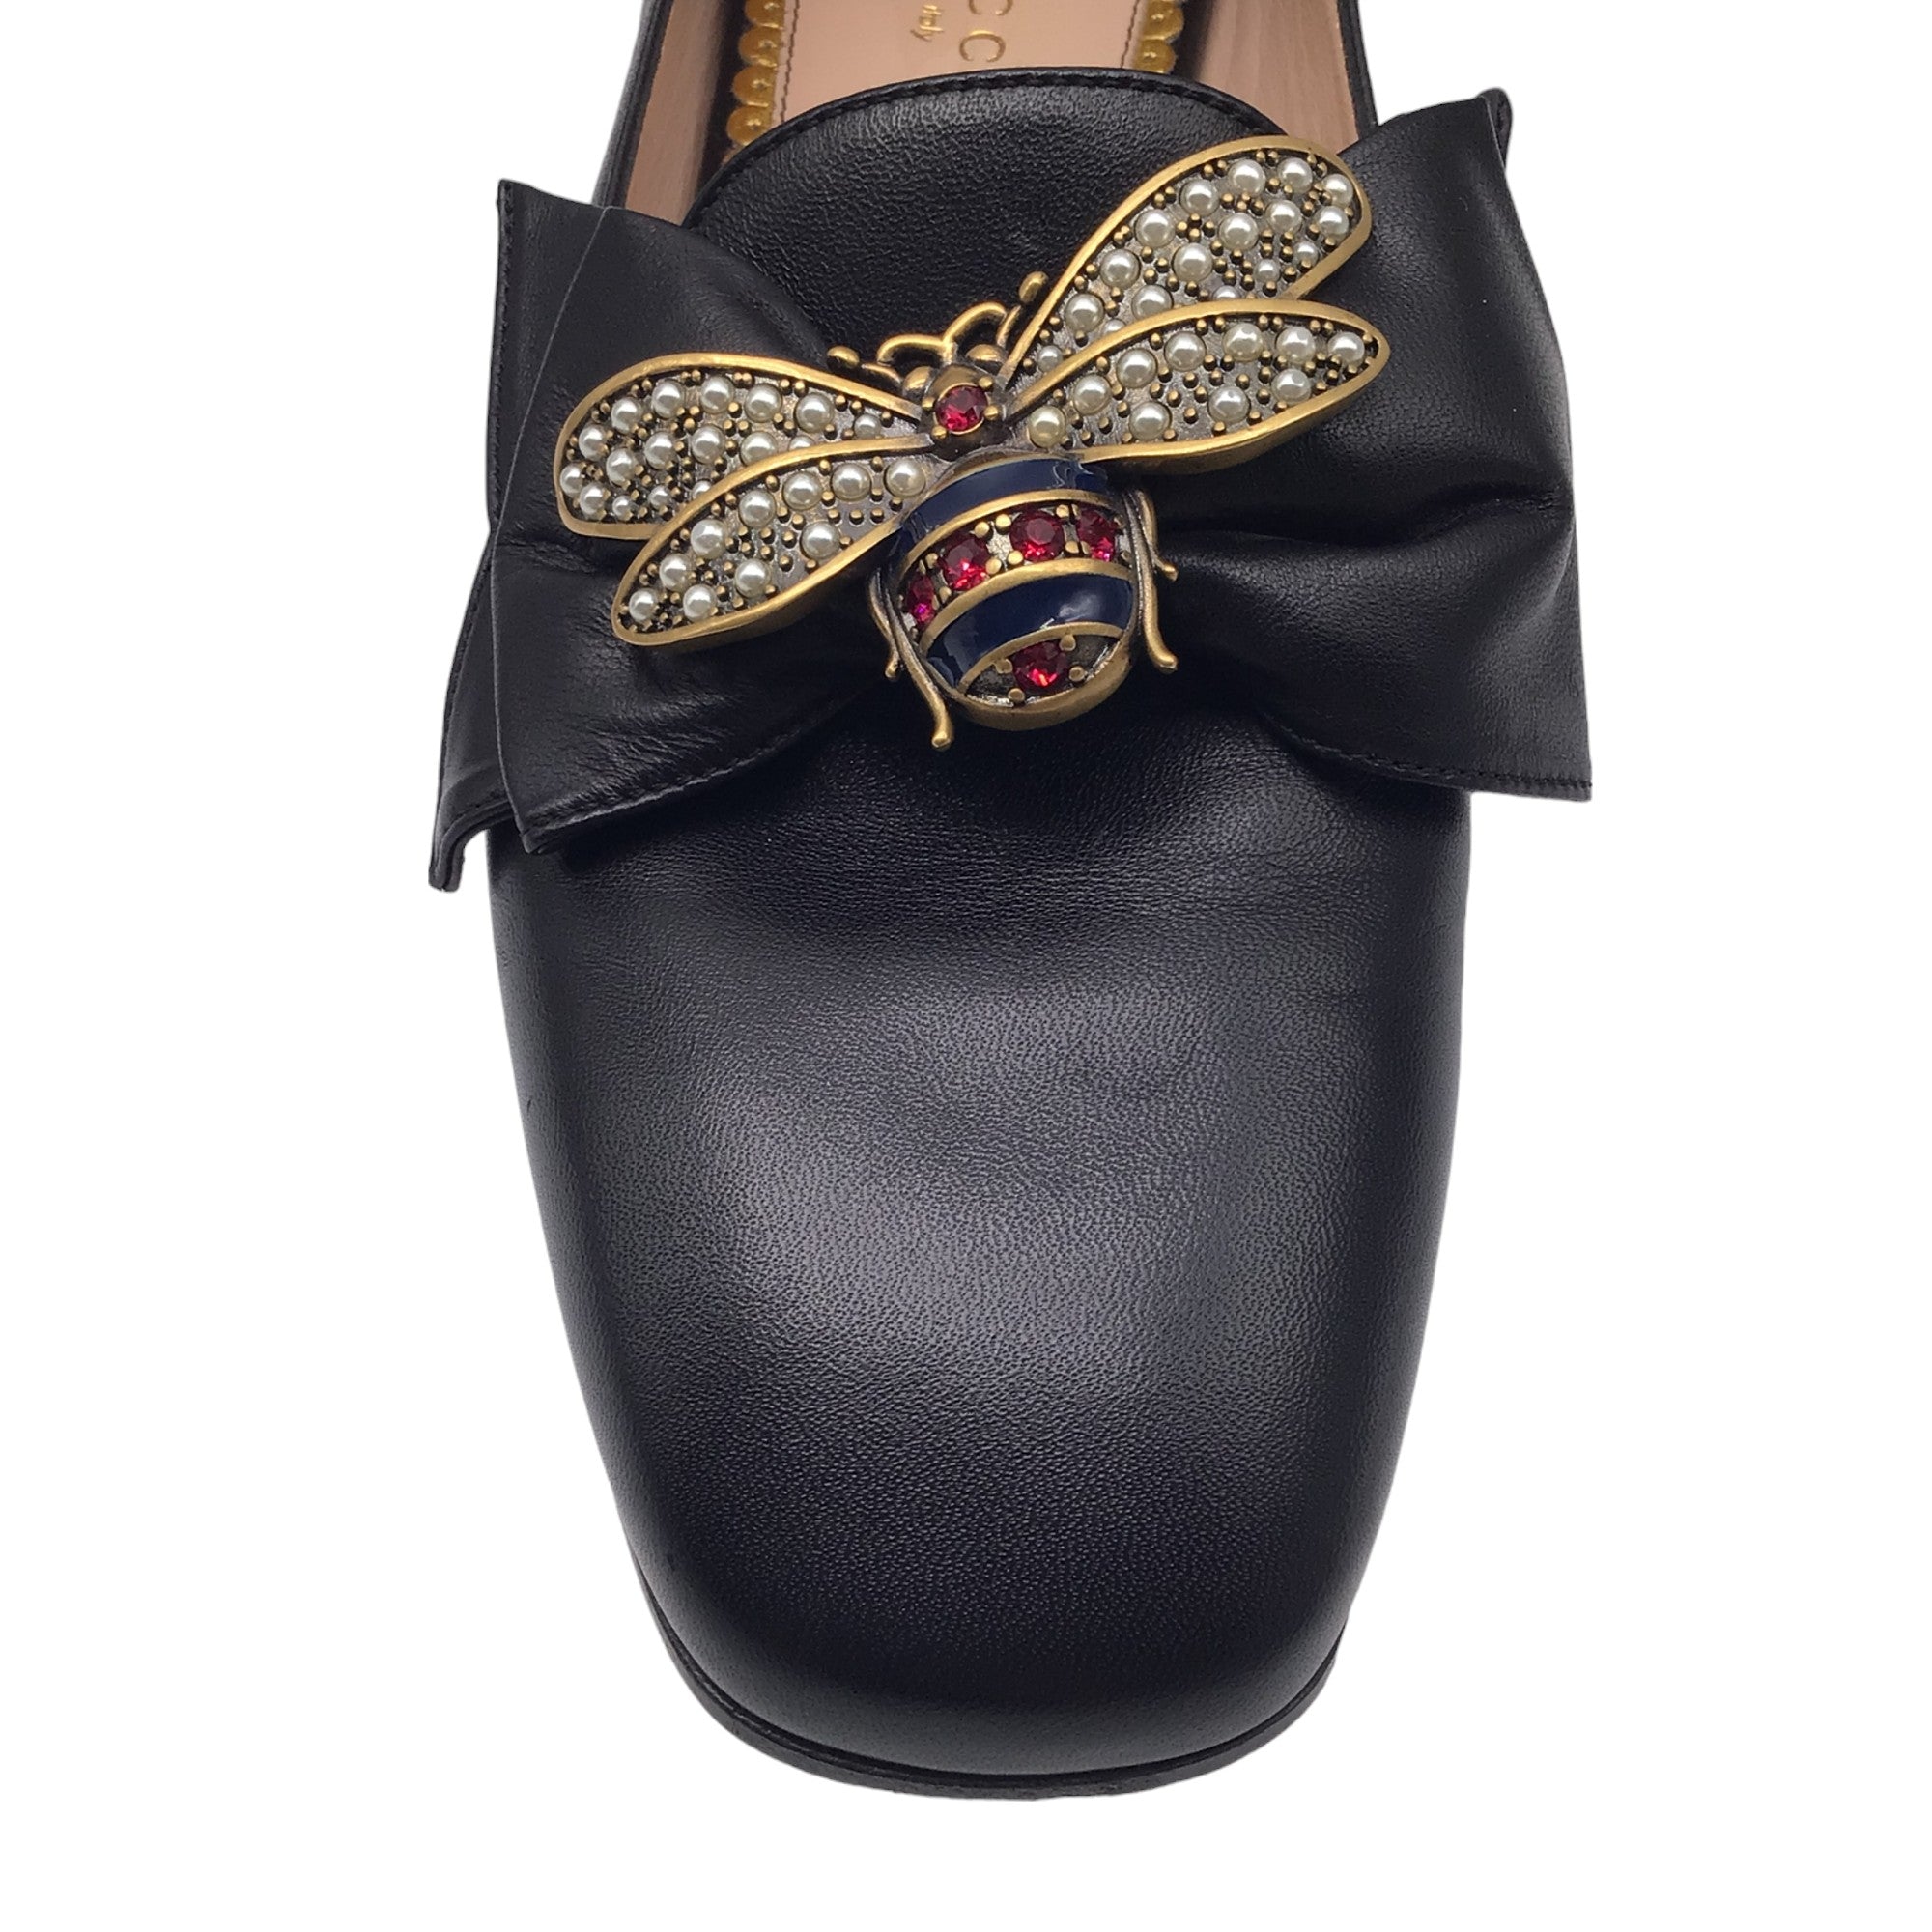 Gucci Black Queen Margaret Nappa Calfskin Leather Loafers